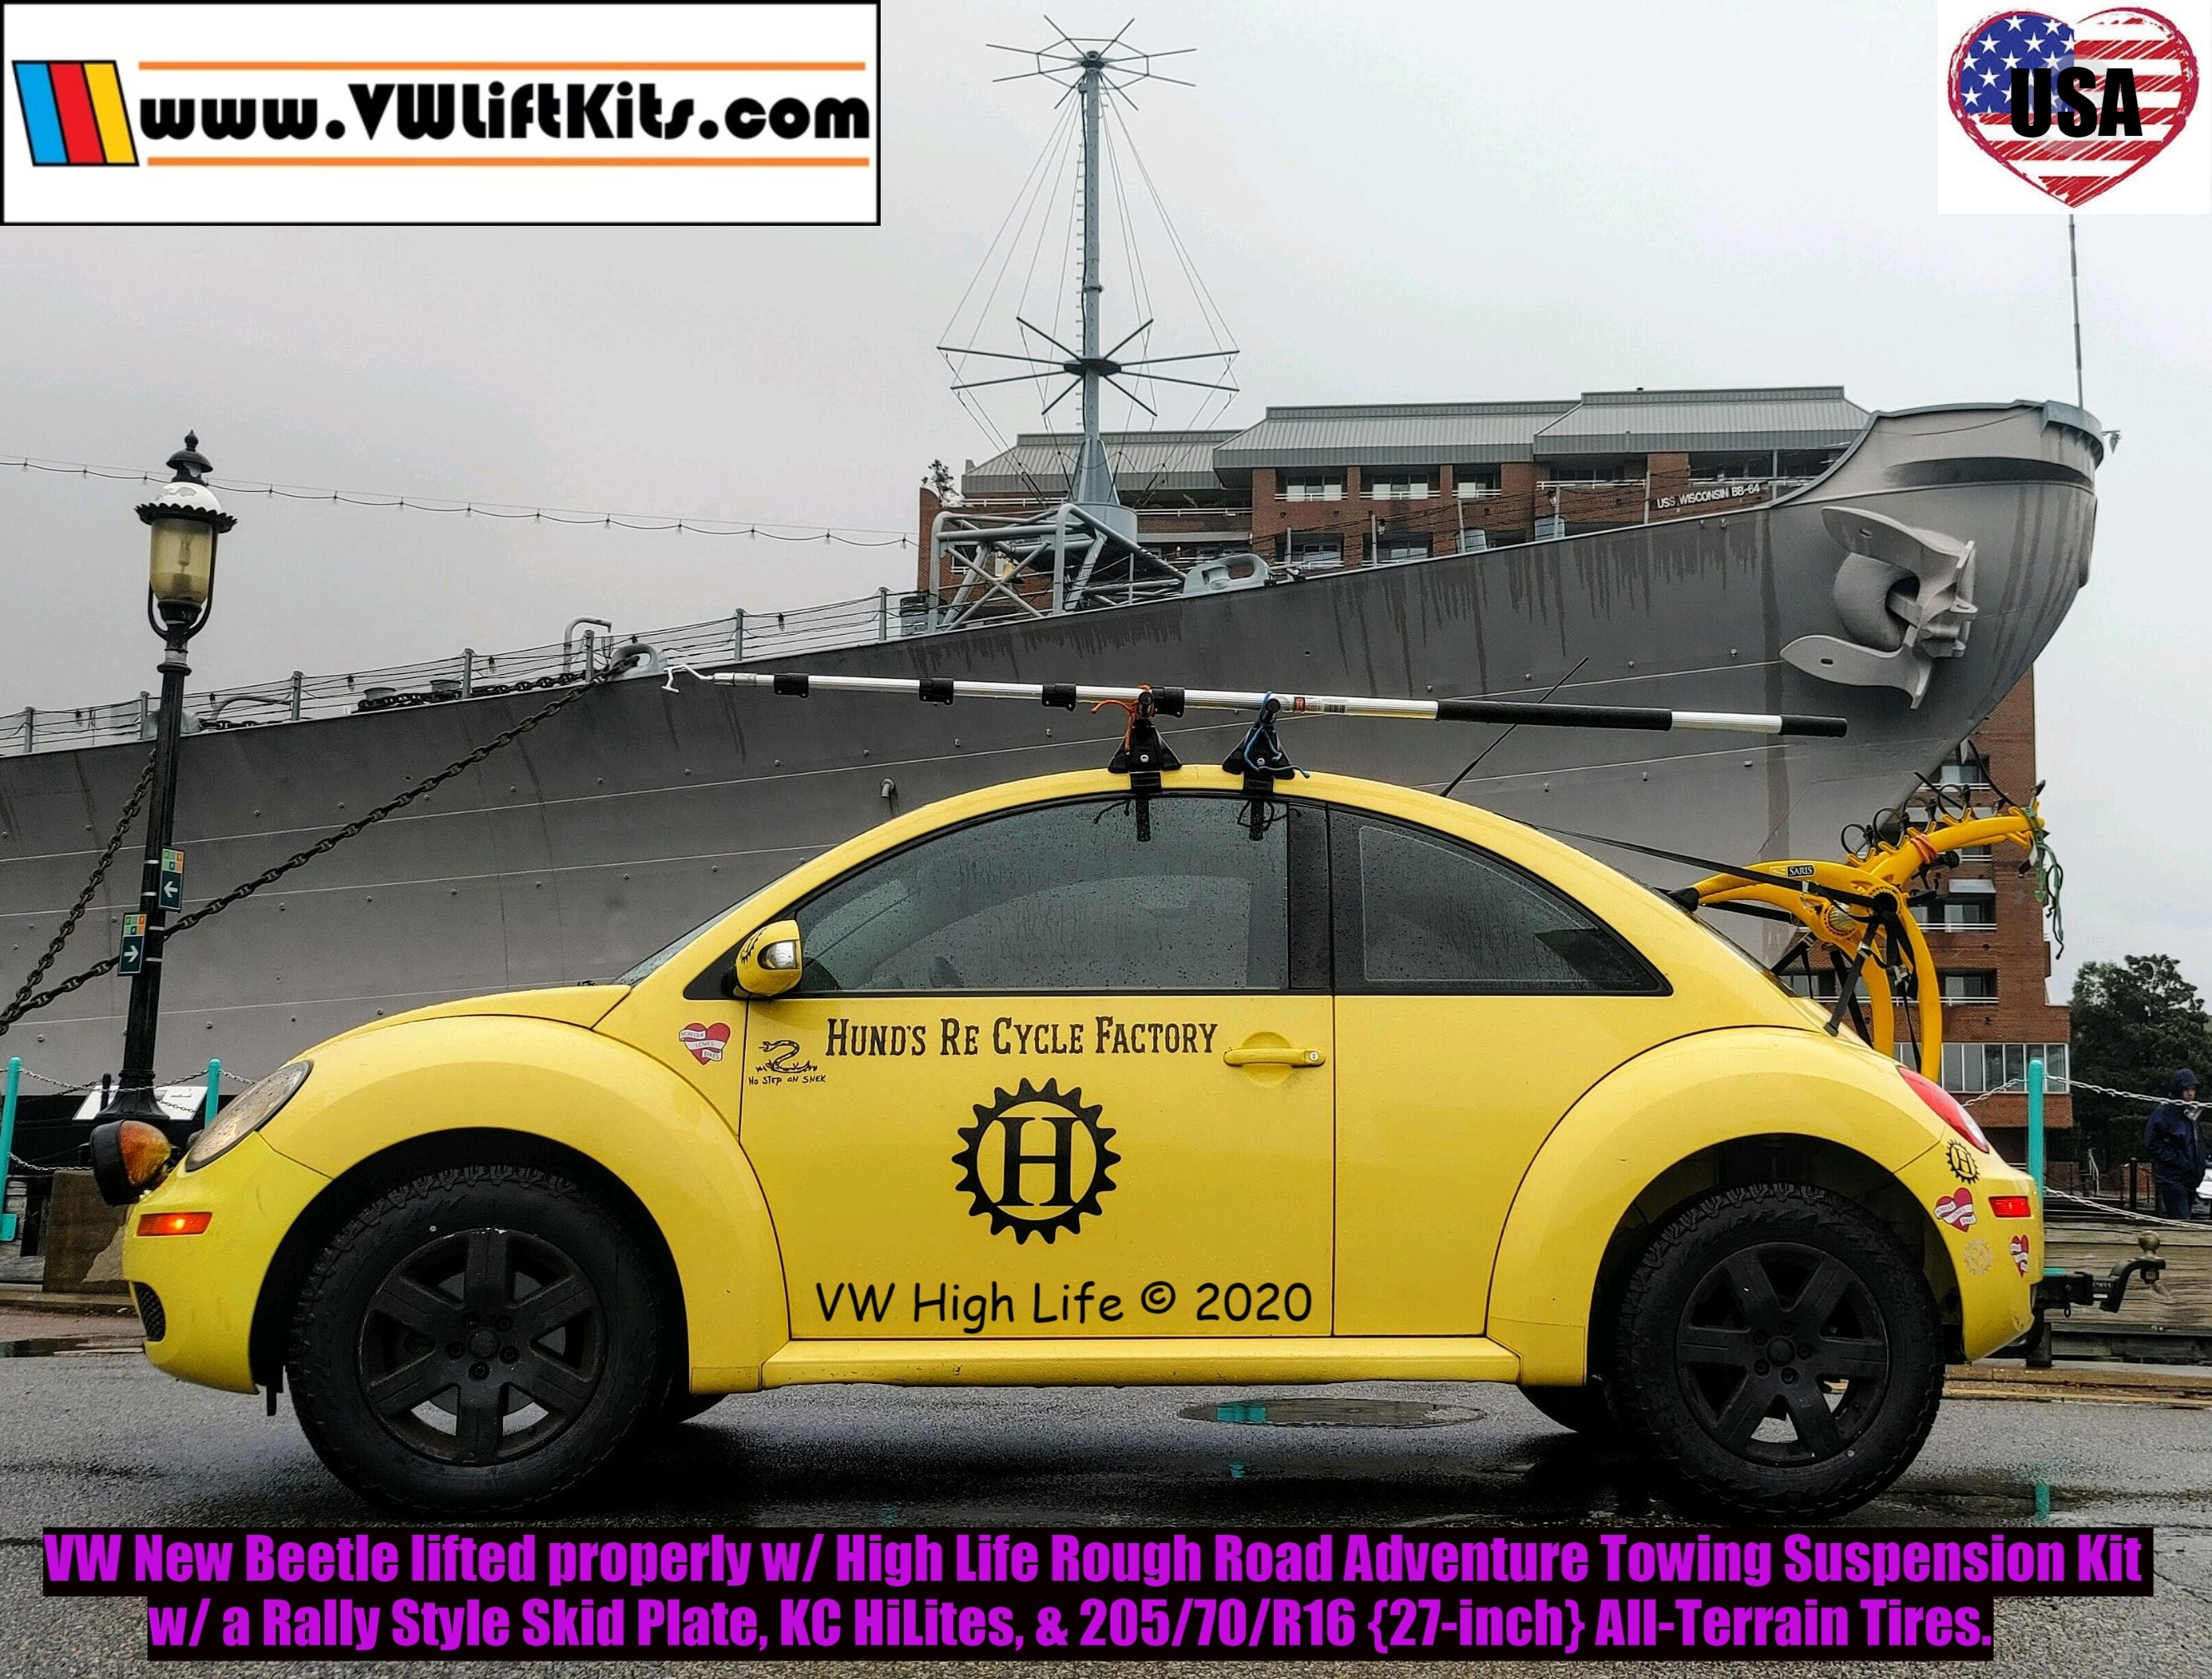 VW New Beetle Adventure Bug raised properly w/ the VW High Life Rough Road Towing Package.